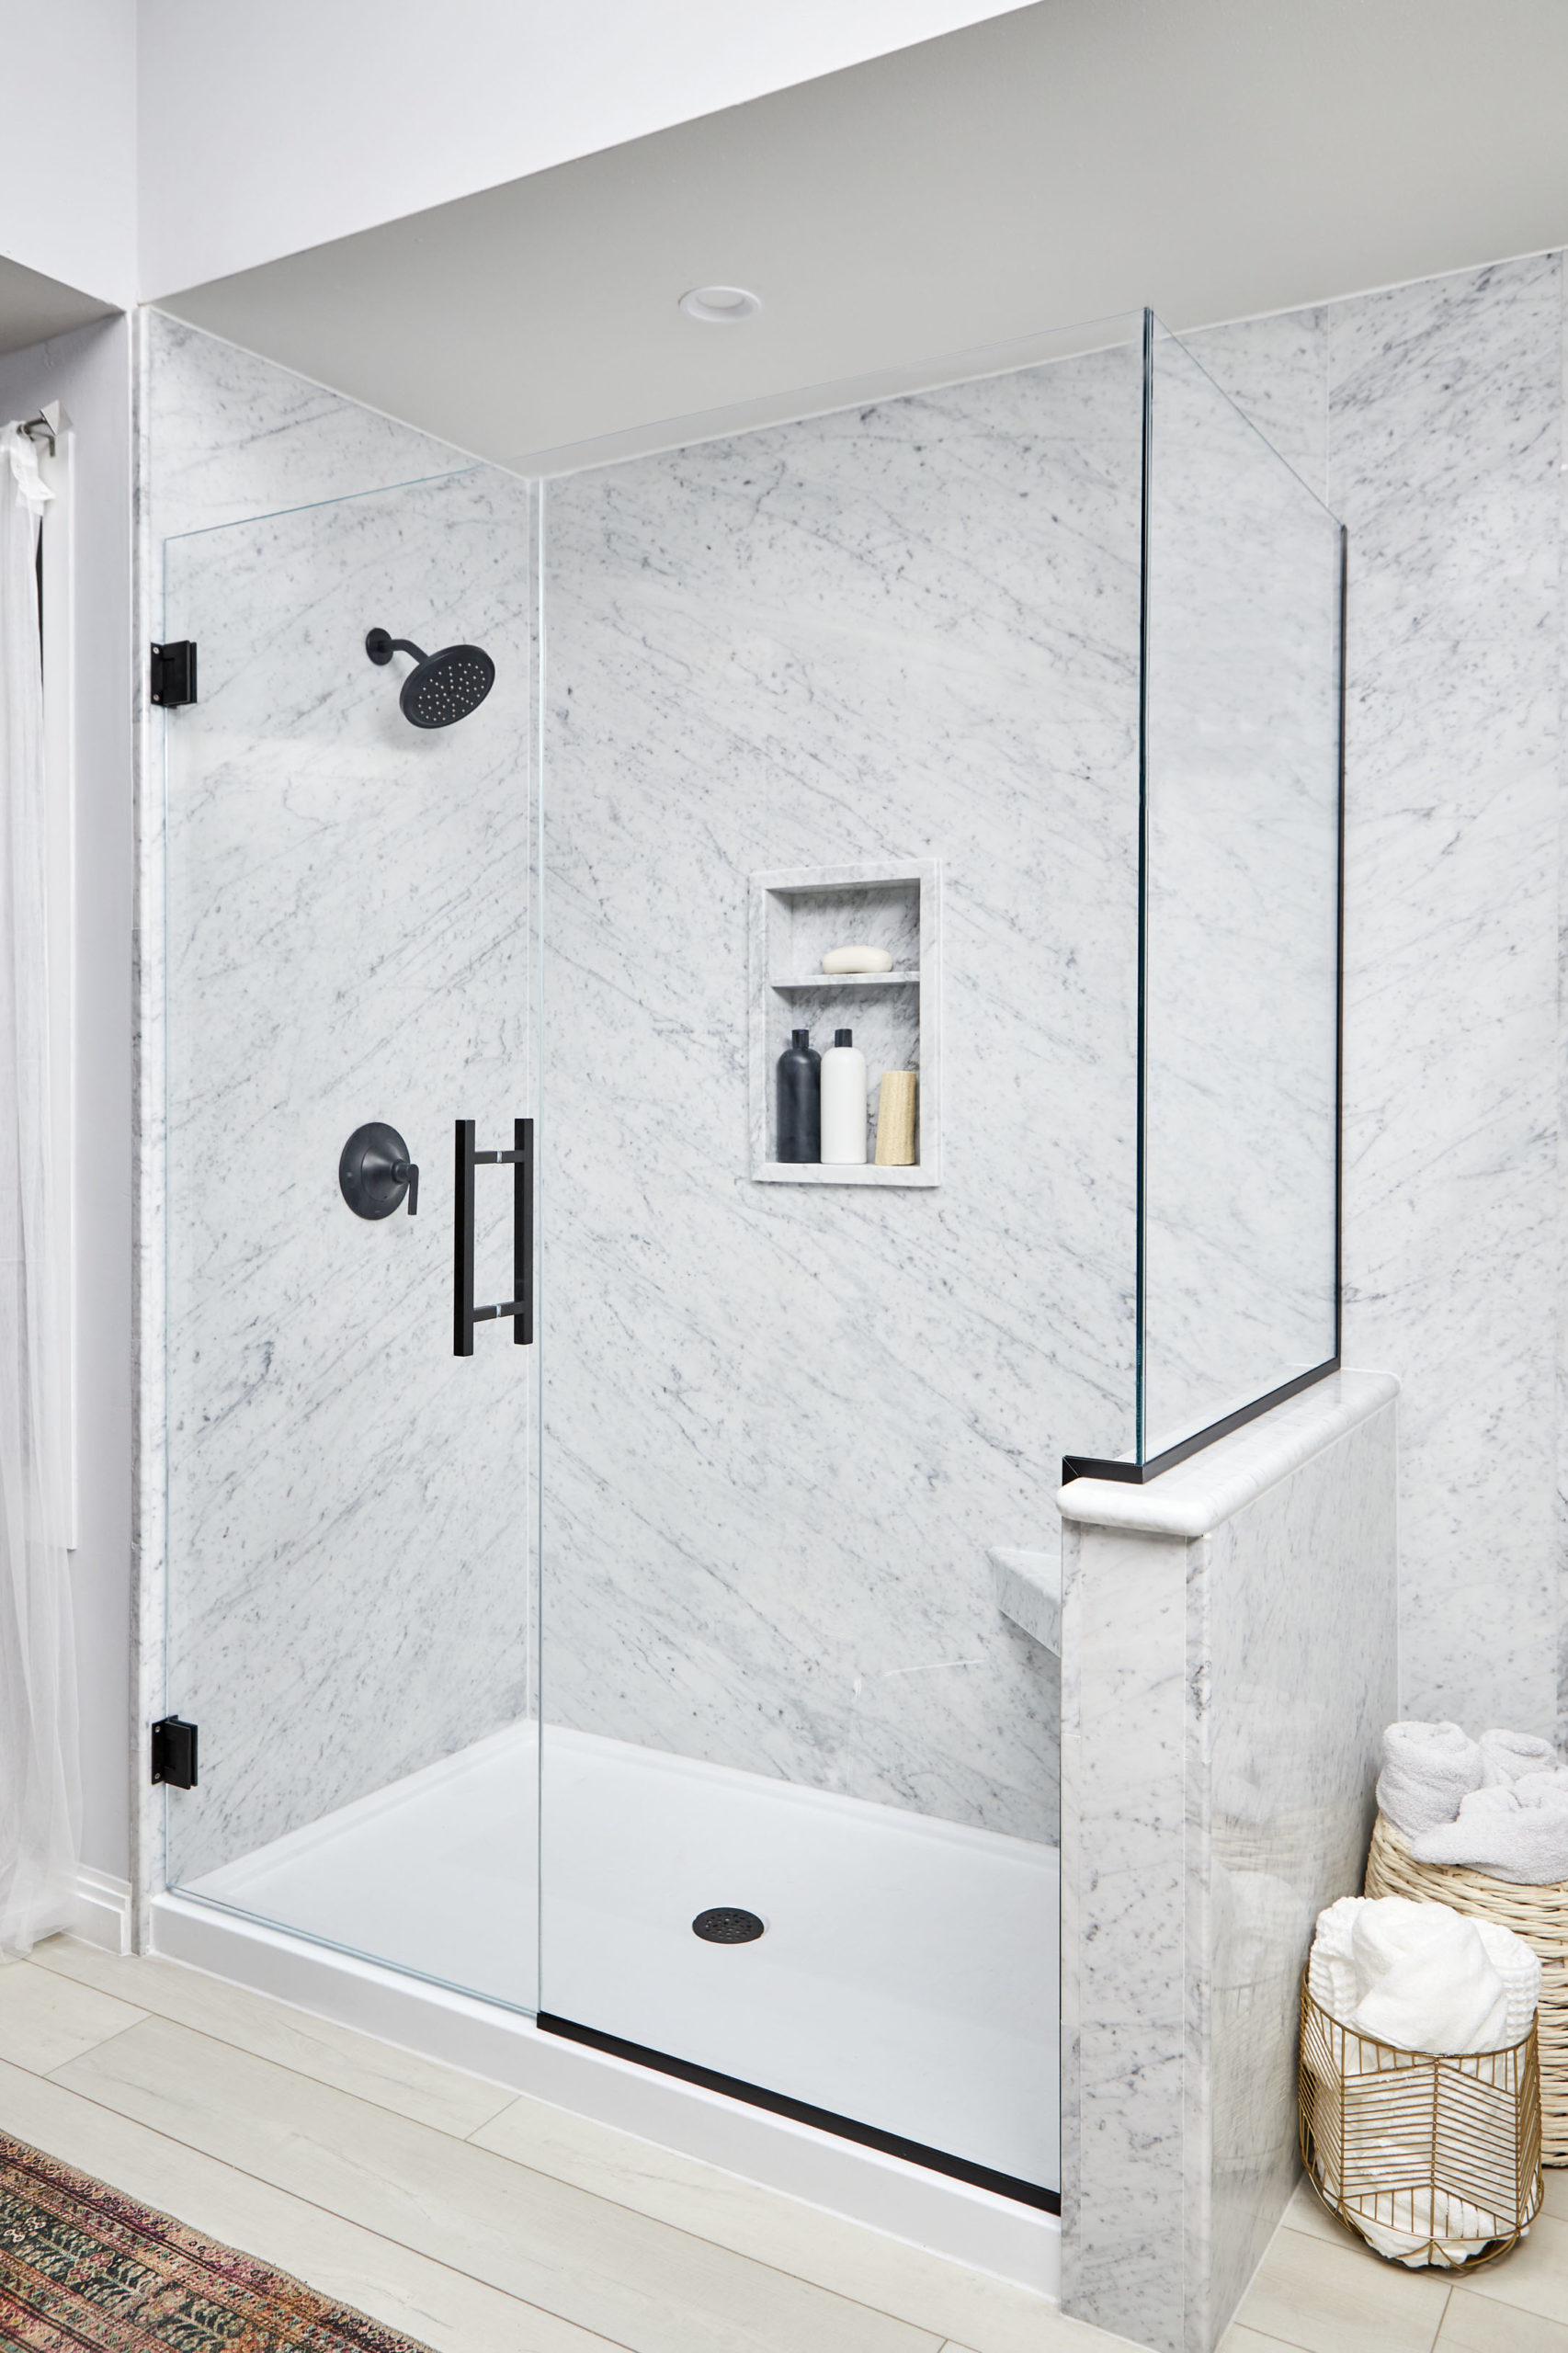 Dream Bathrooms Trends: Fewer Tubs, More Walls Around Toilets